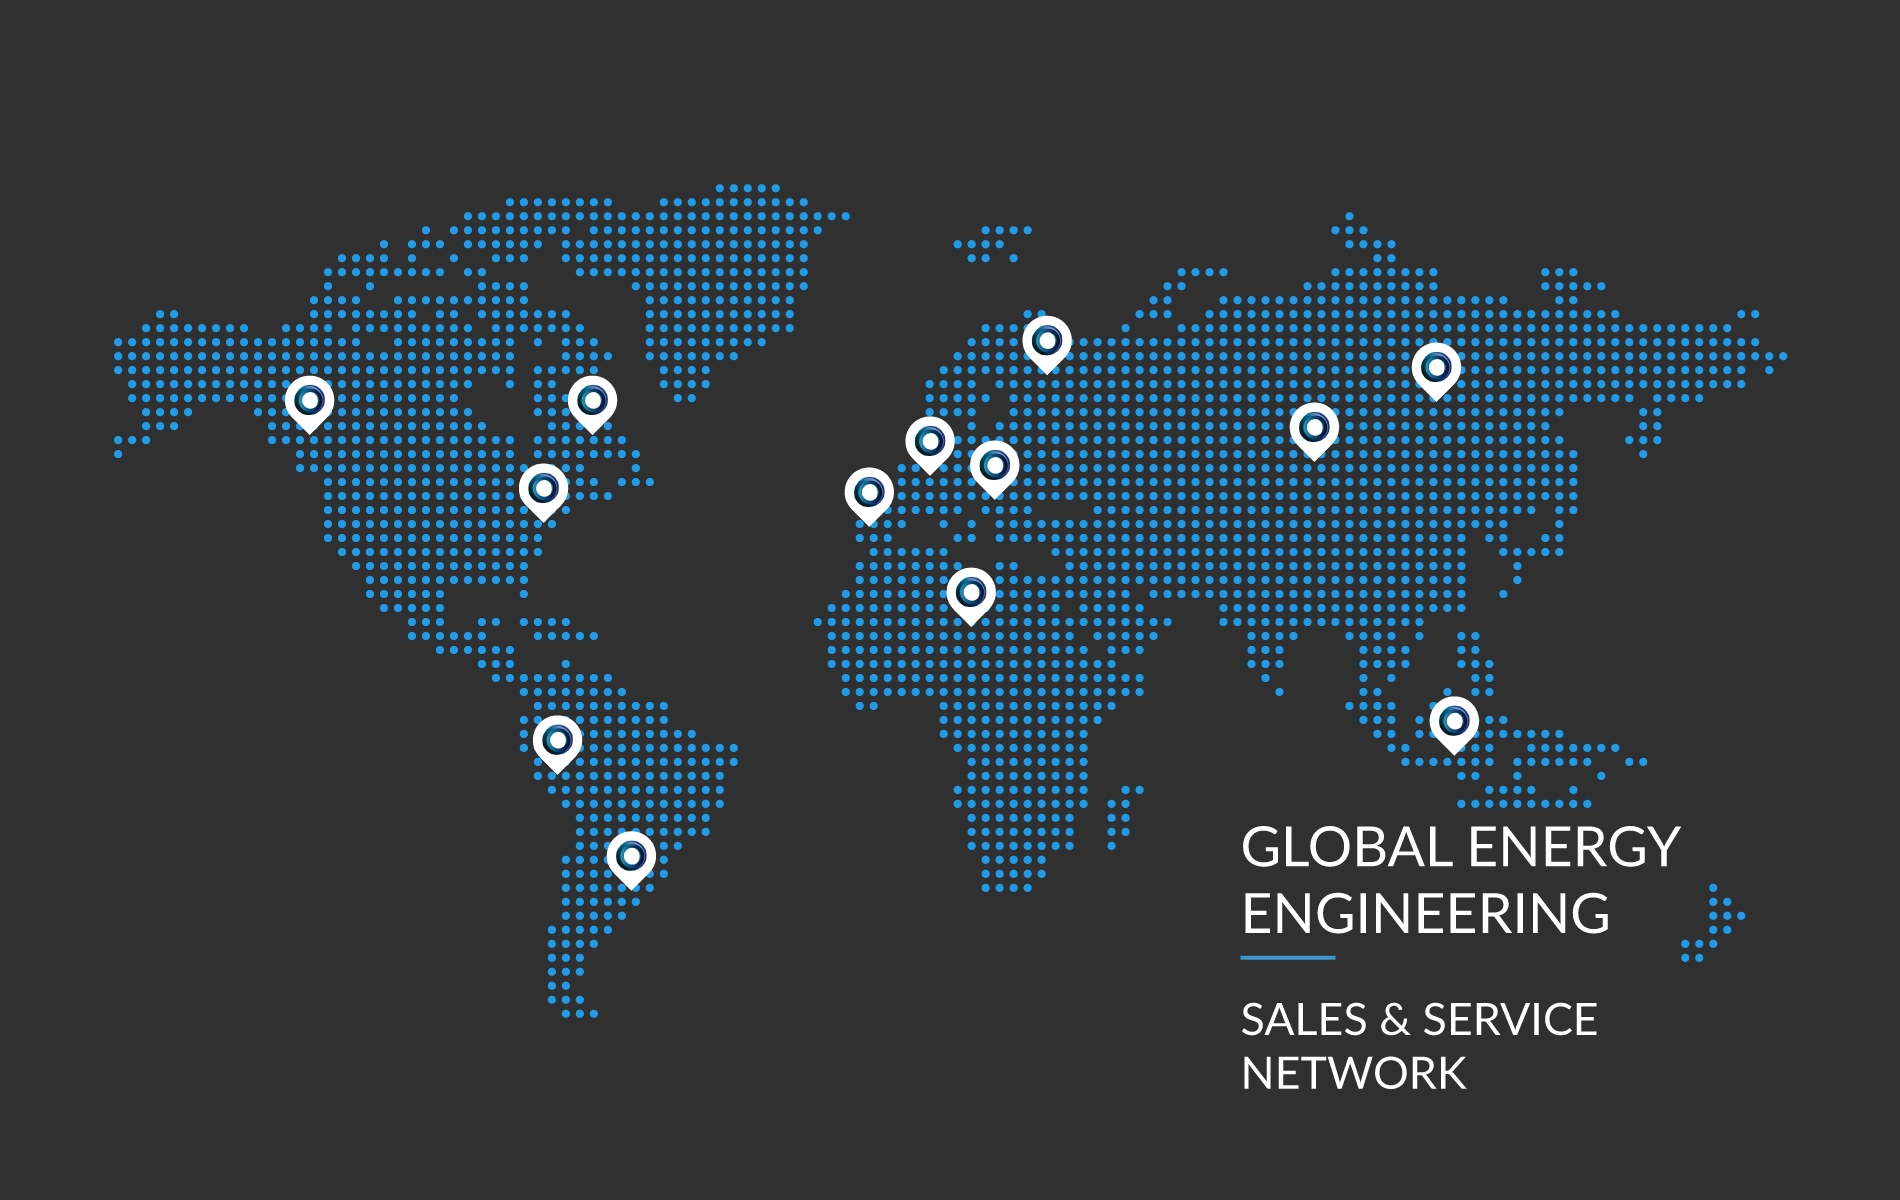 Global energy Engineering - Sales and service network